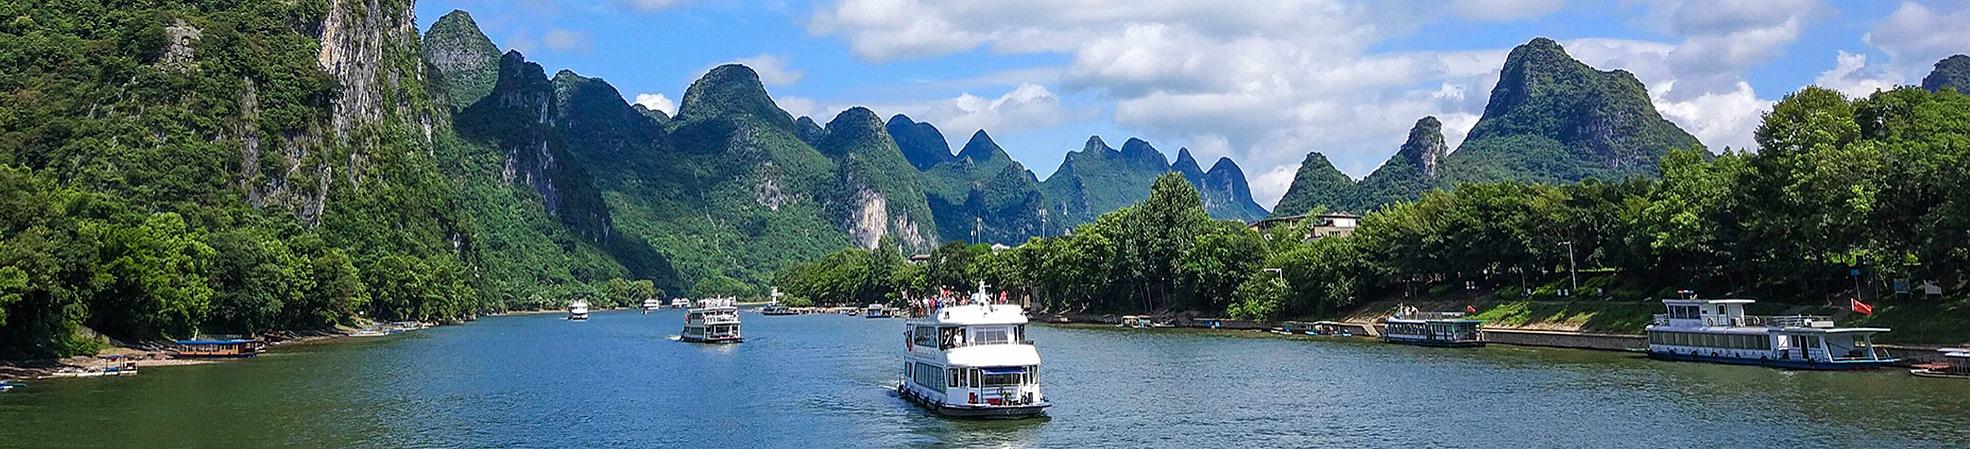 Best Locations and Seasons for Li River Photography